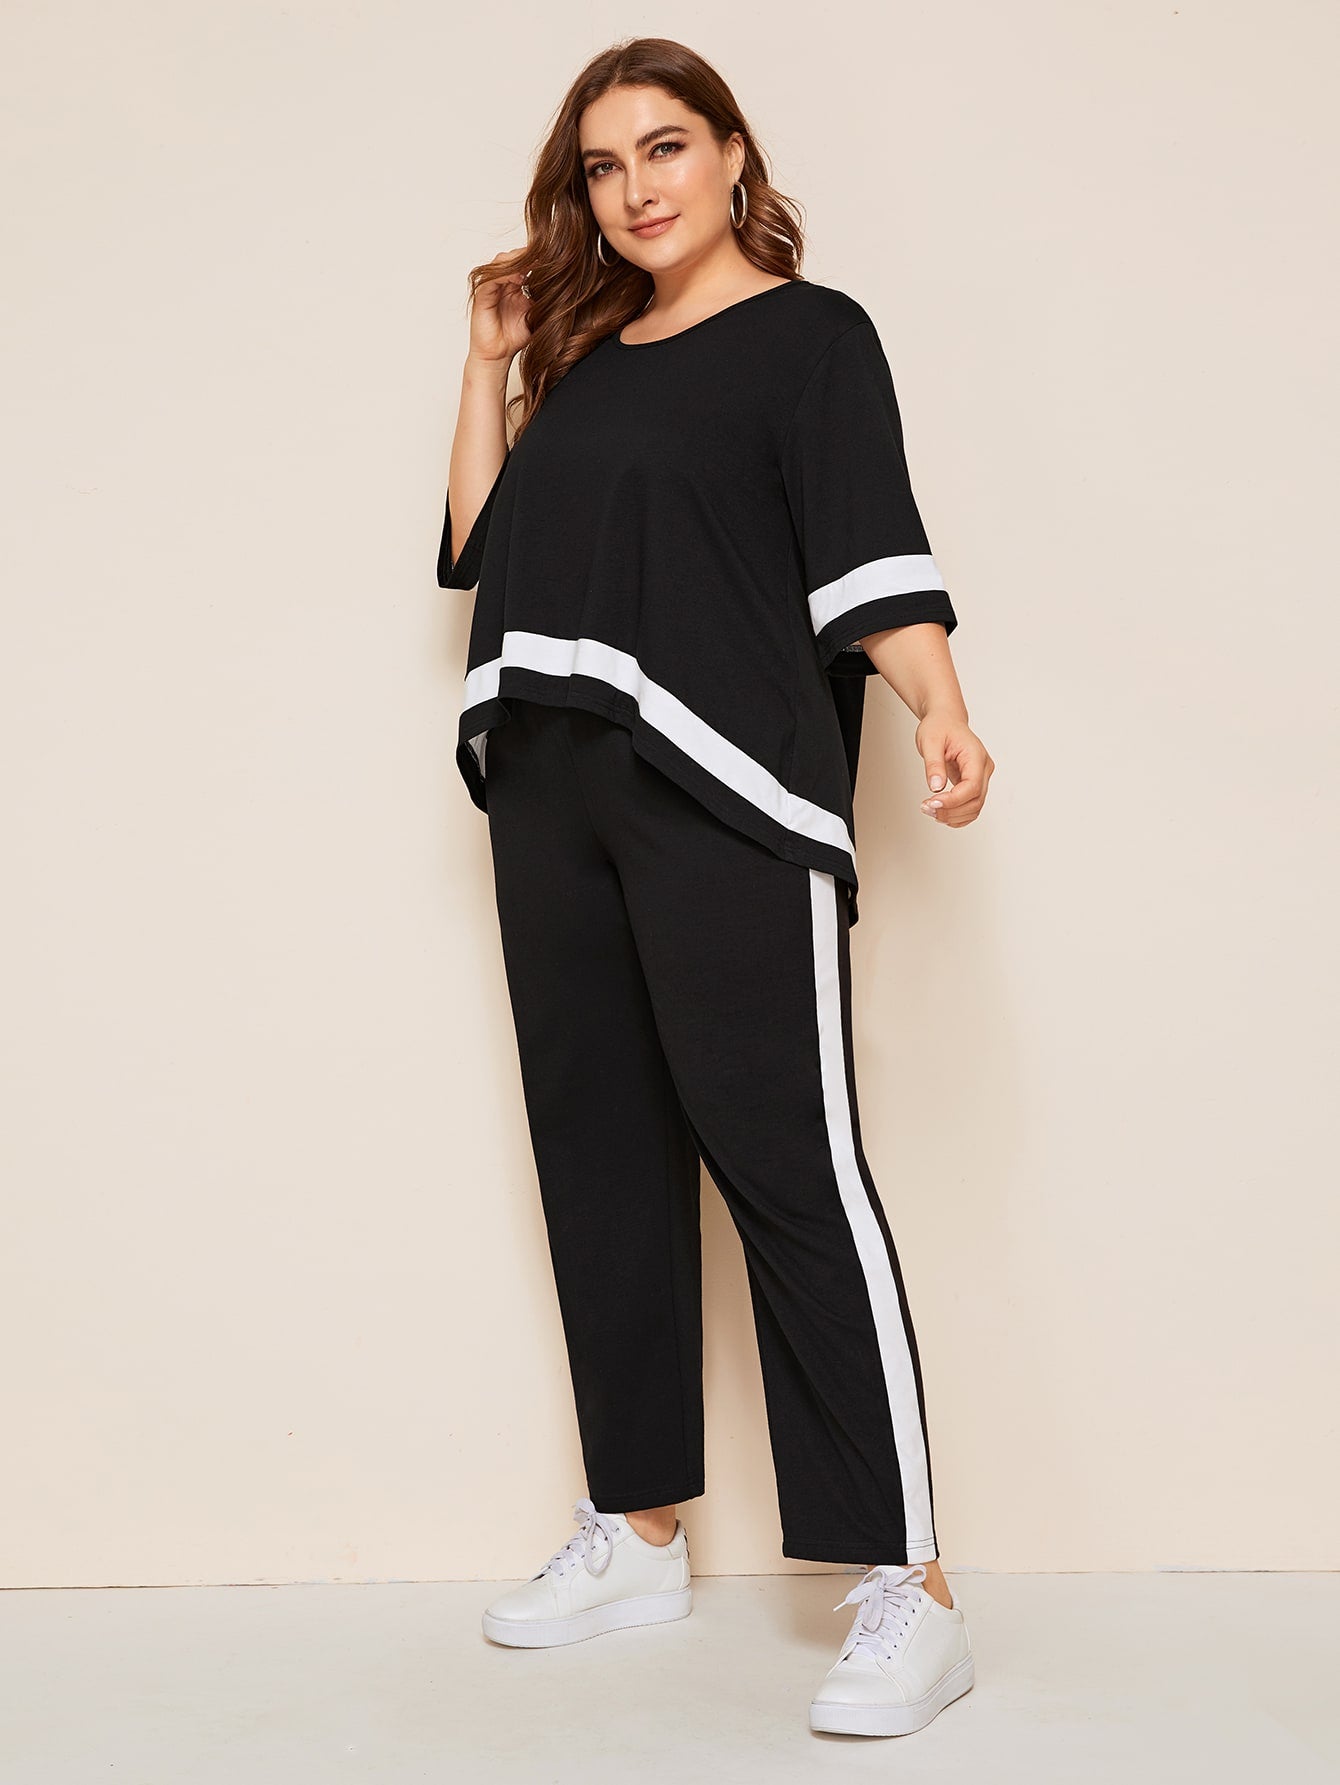 High low top with pants set